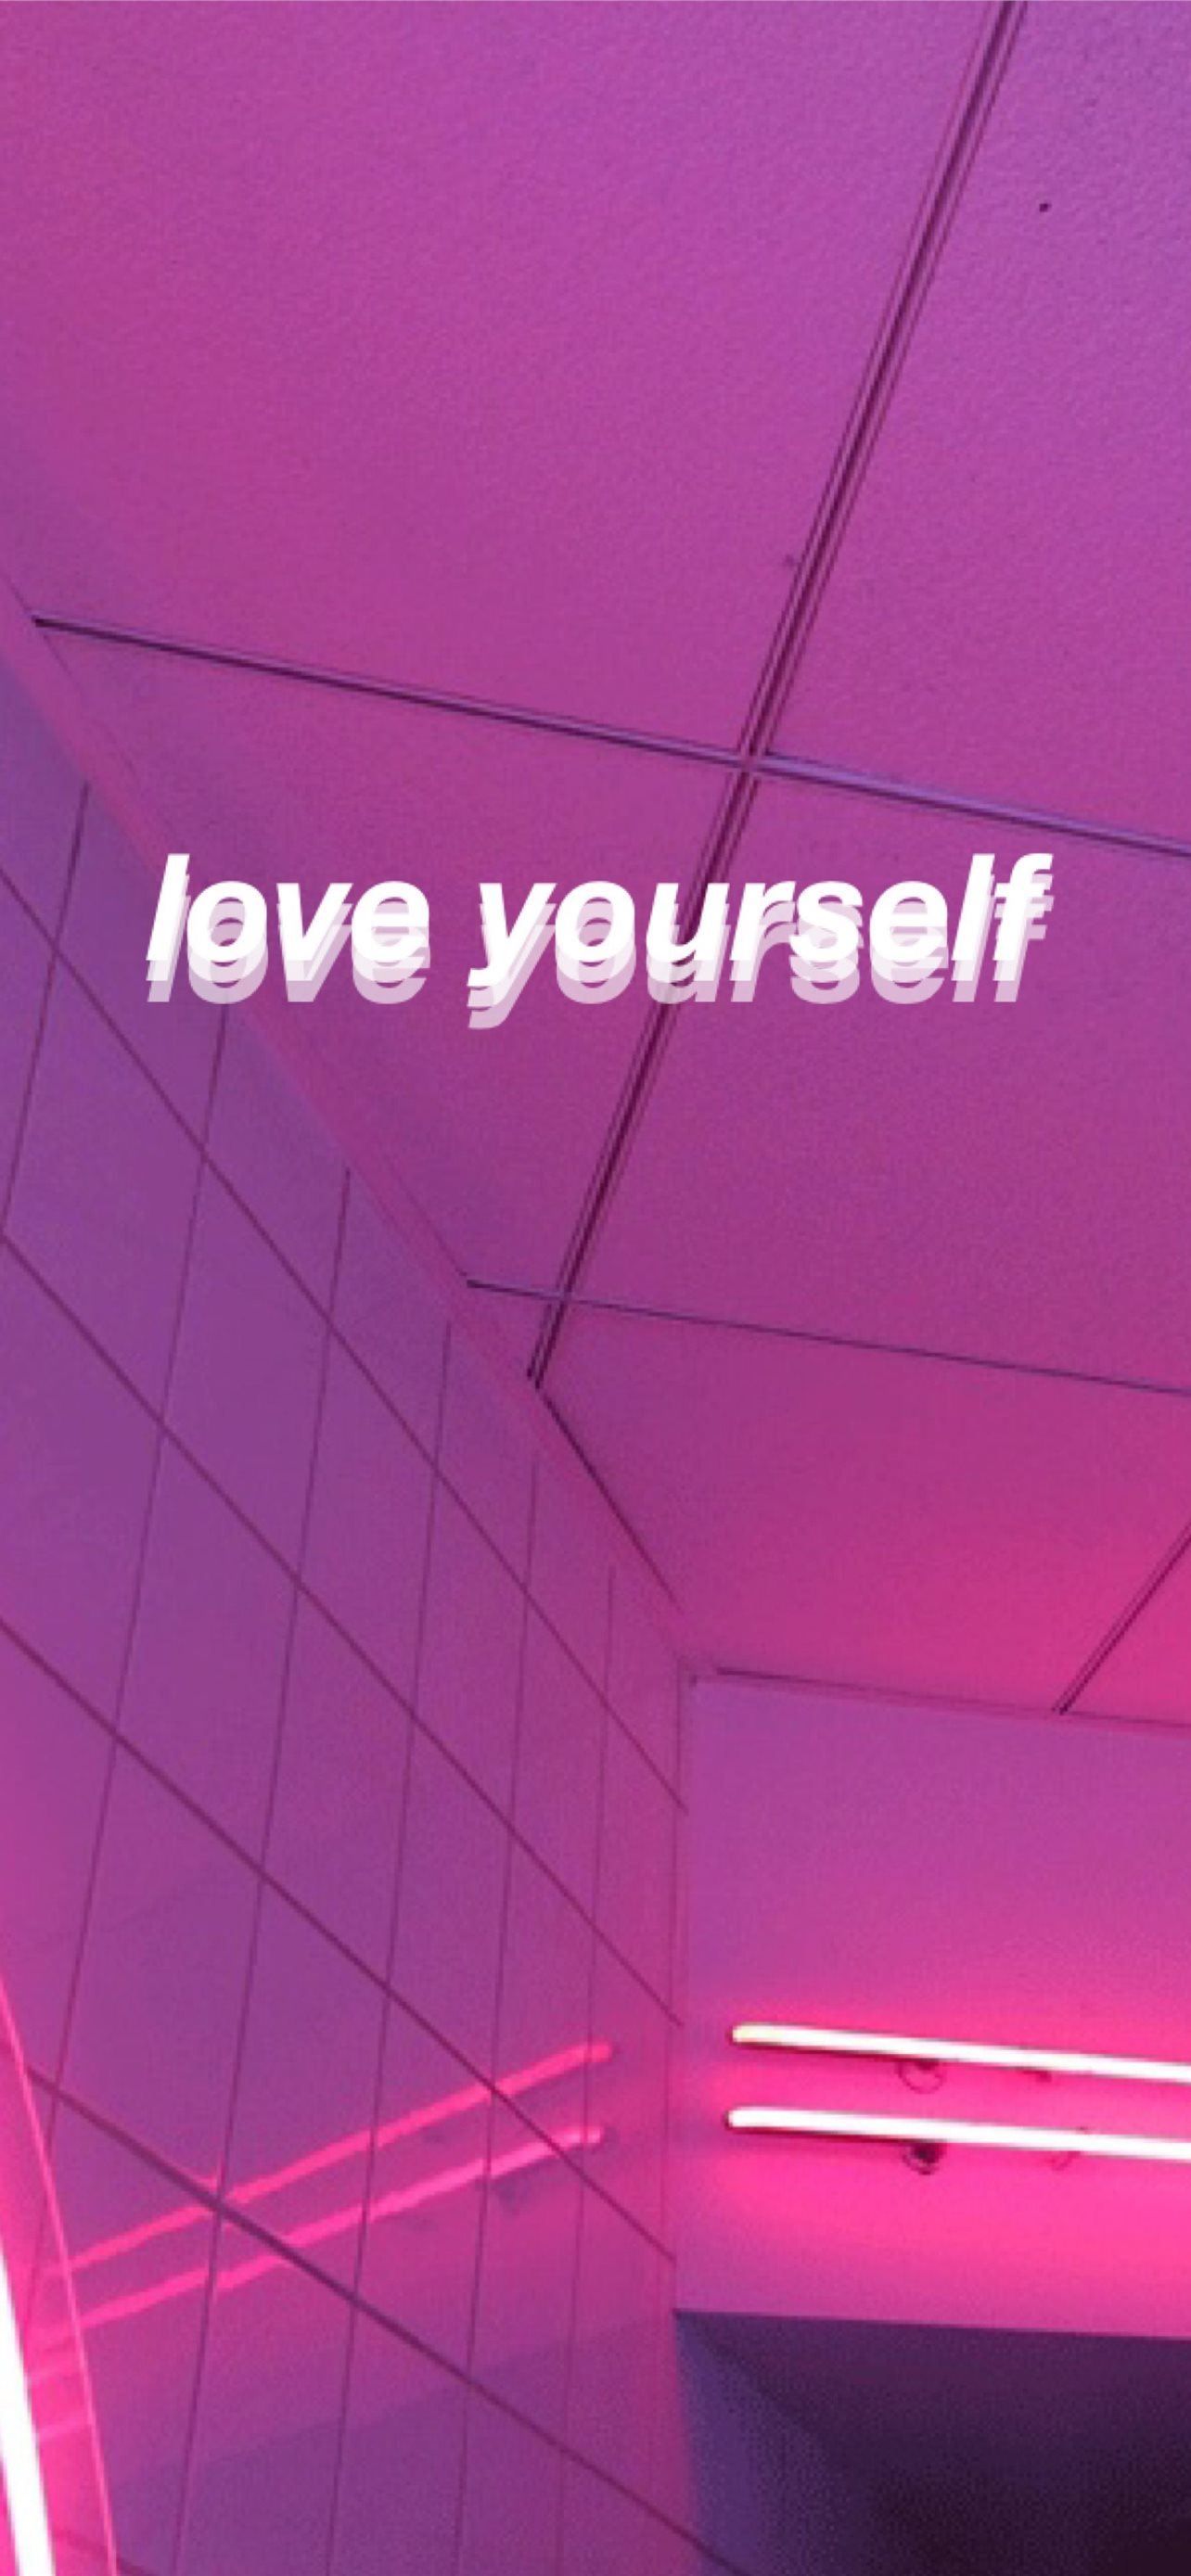 Aesthetic pink and purple background with the words 